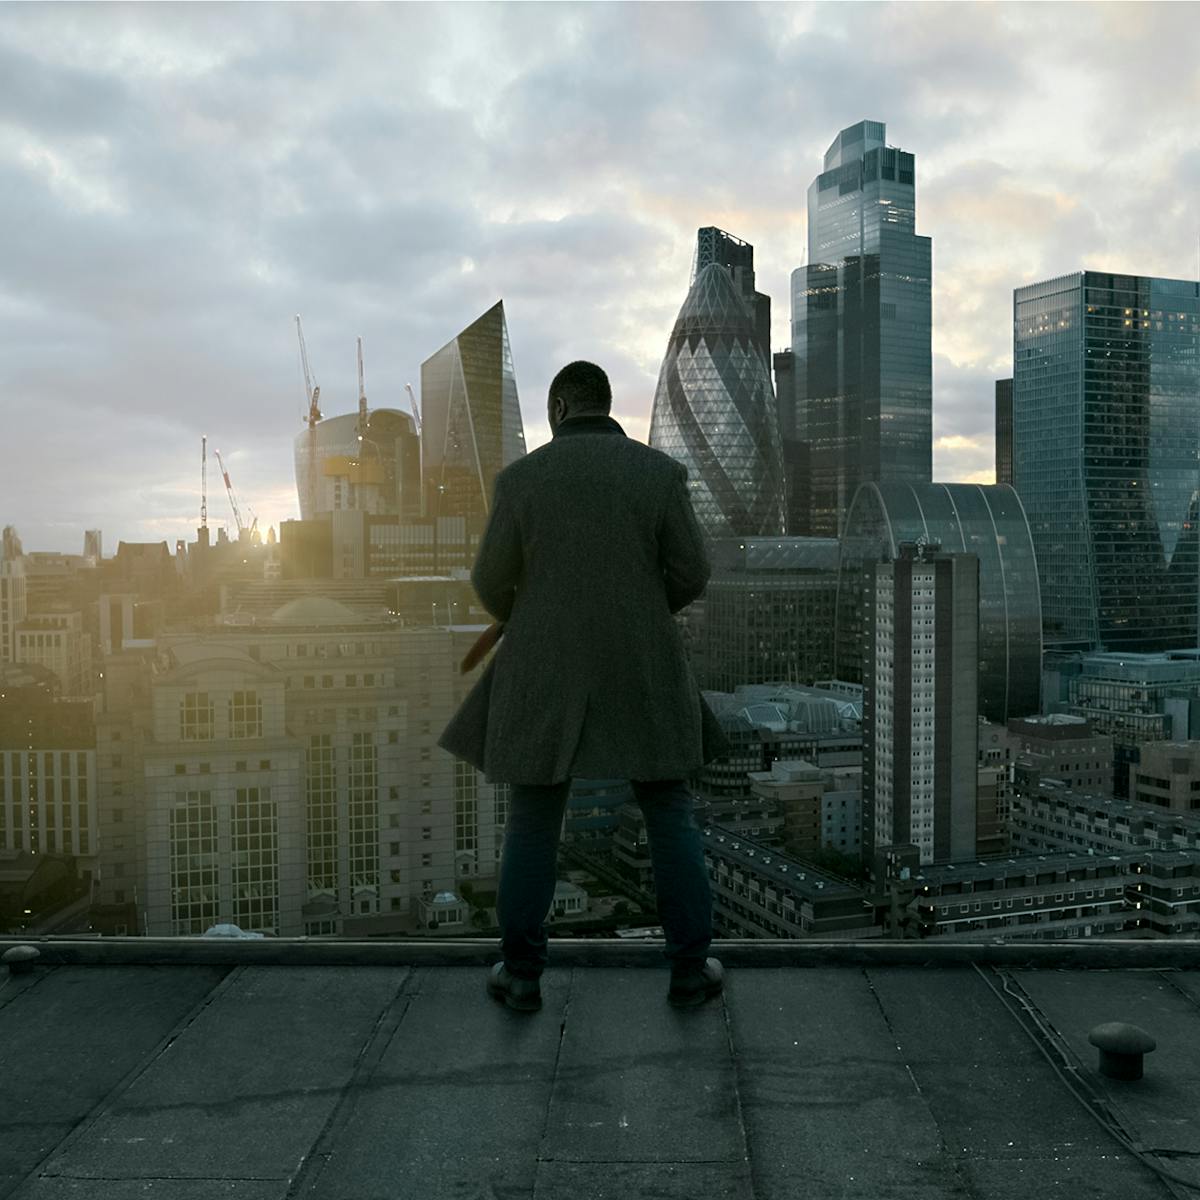 John Luther (Idris Elba) stands on a roof overlooking London, as the sun crests behind the skyline.